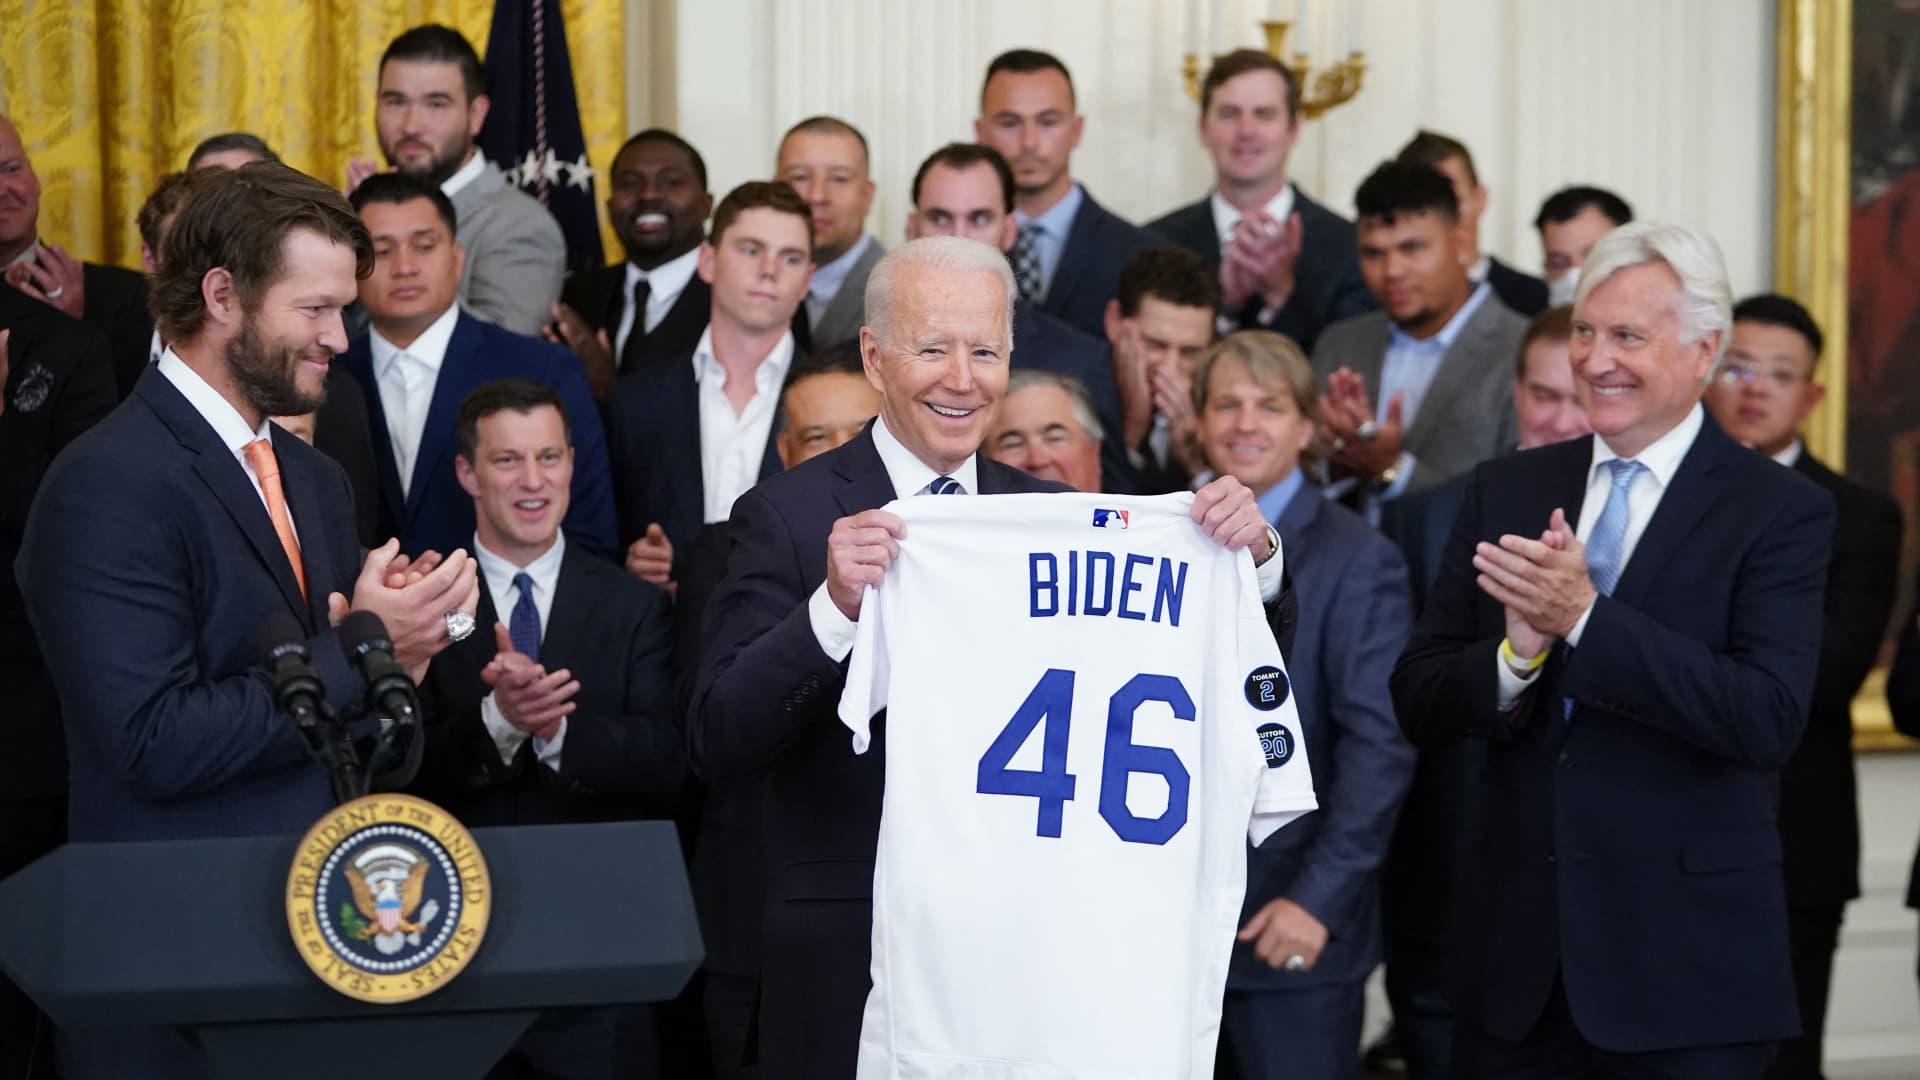 US President Joe Biden holds up a Los Angeles Dodgers team baseball jersey as he welcomes the 2020 World Series Champions during a ceremony in the East Room of the White House in Washington, DC on July 2, 2021.